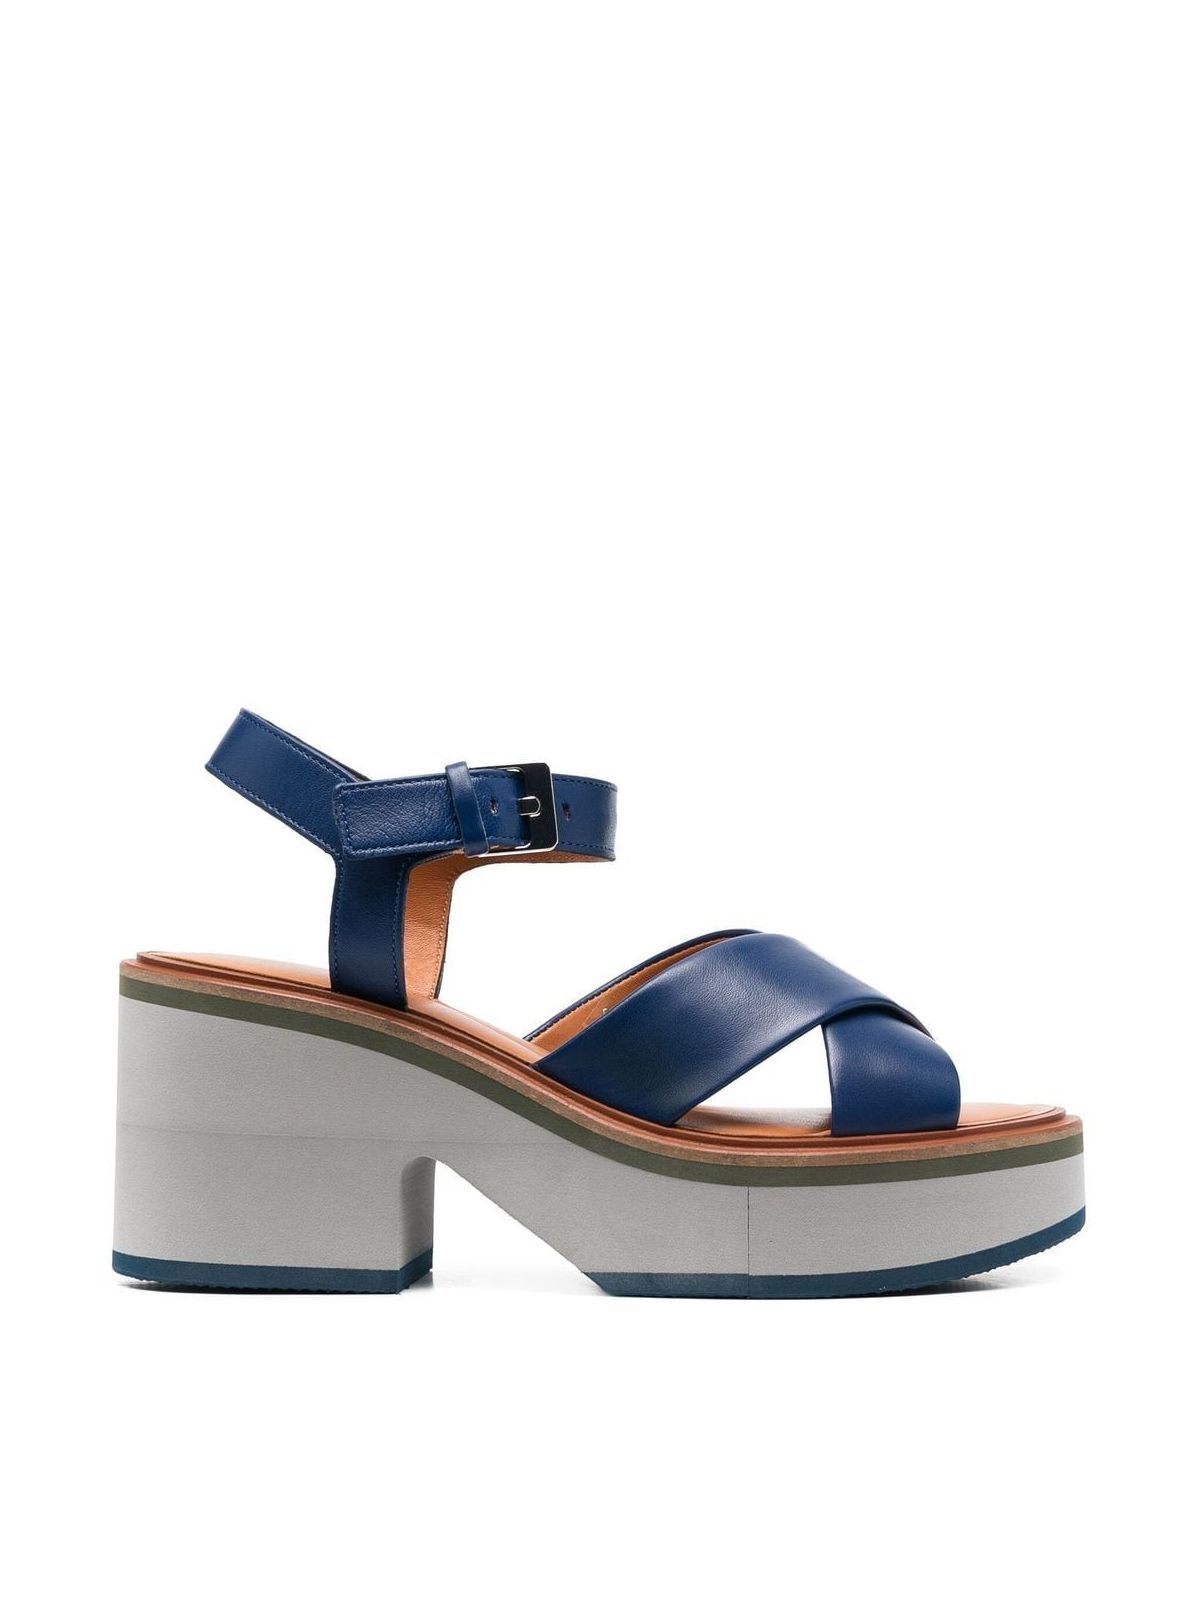 Clergerie Charline Leather Sandals In Navy Nap